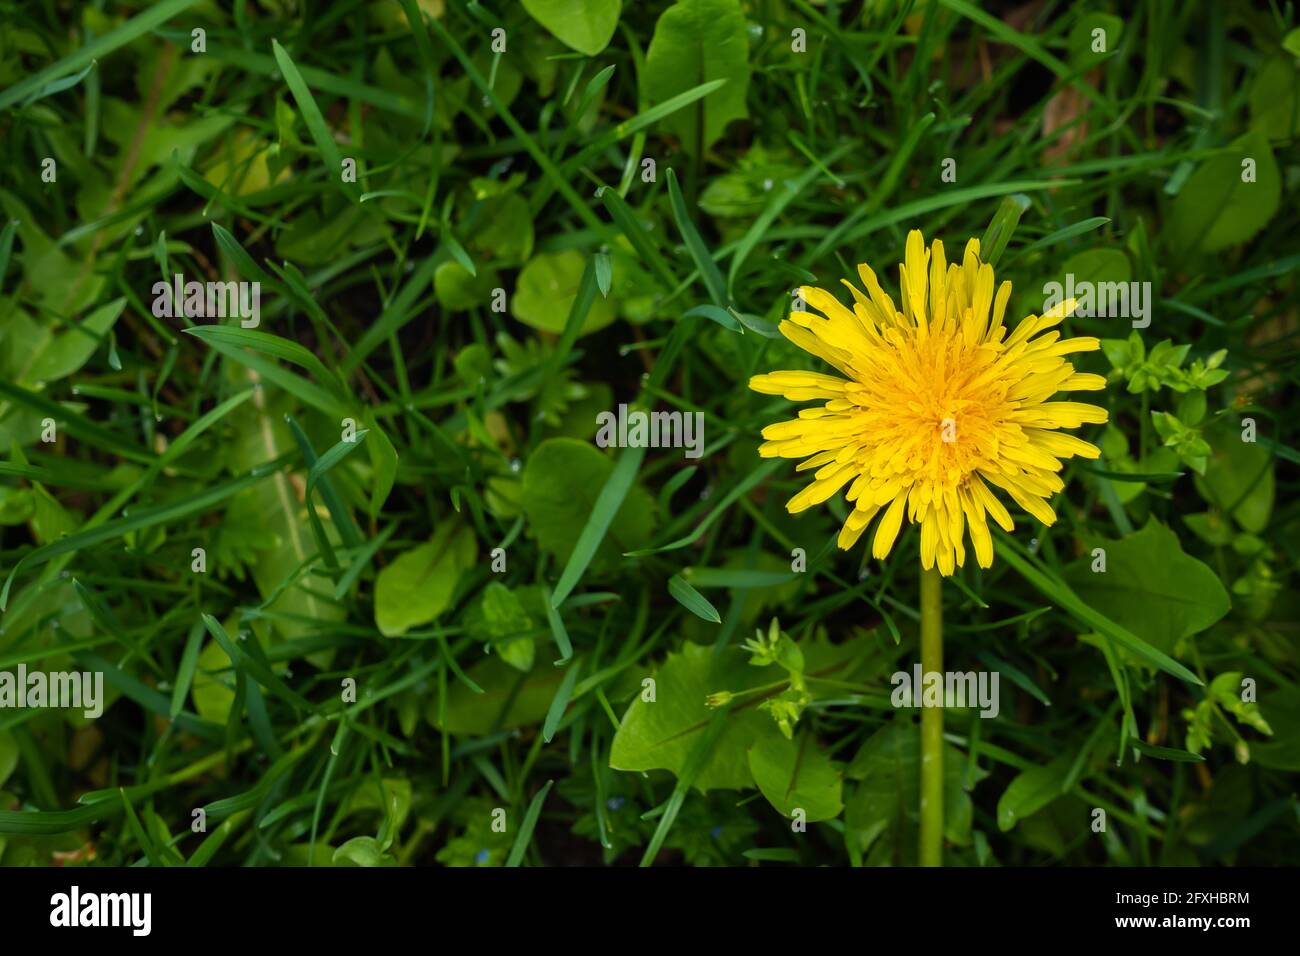 Single yellow flower of Dandelion (Taraxacum officinale) on a green meadow. Photo taken with natural, soft light. Stock Photo